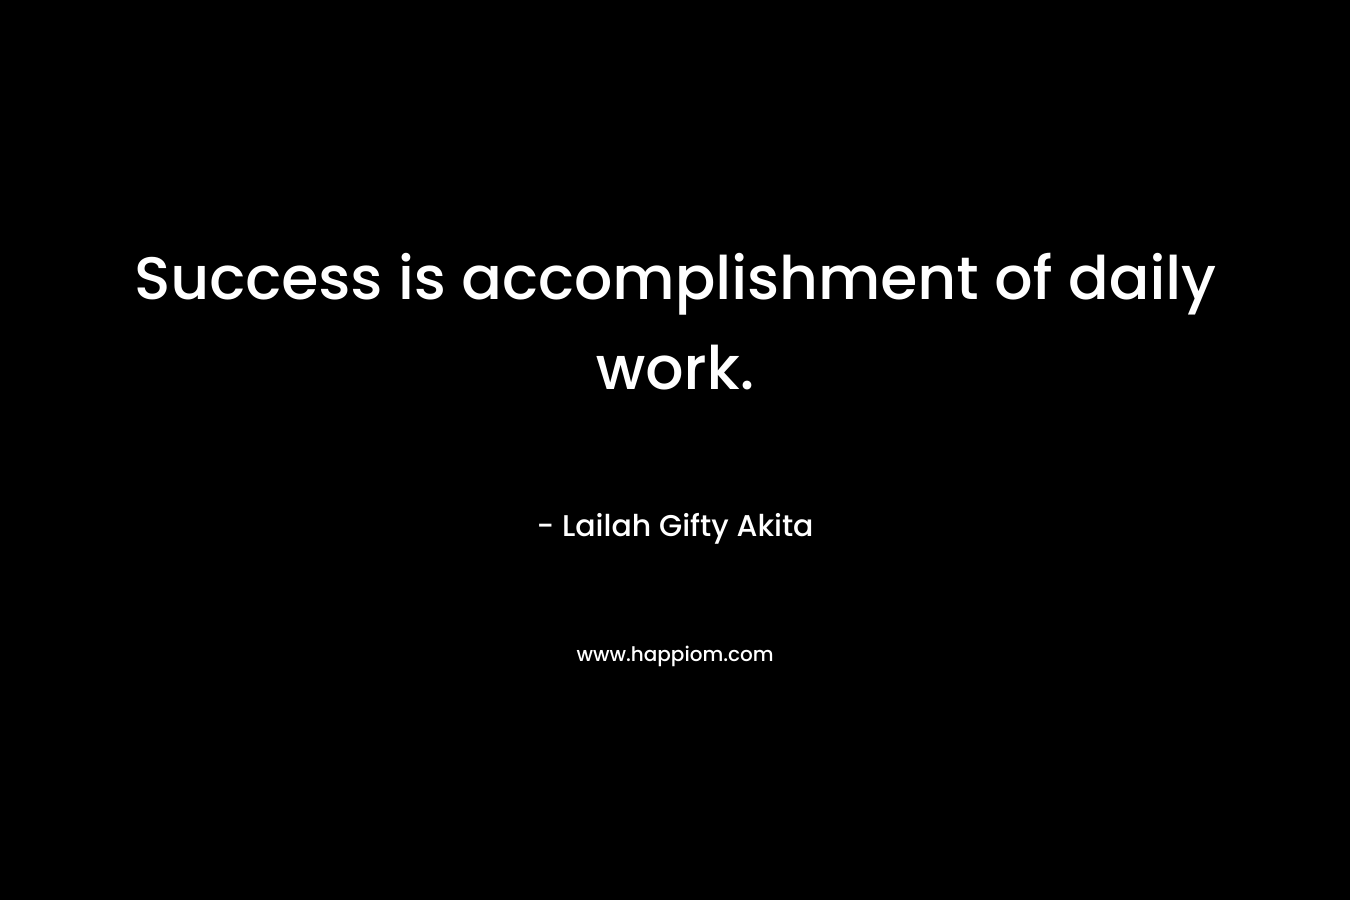 Success is accomplishment of daily work. – Lailah Gifty Akita